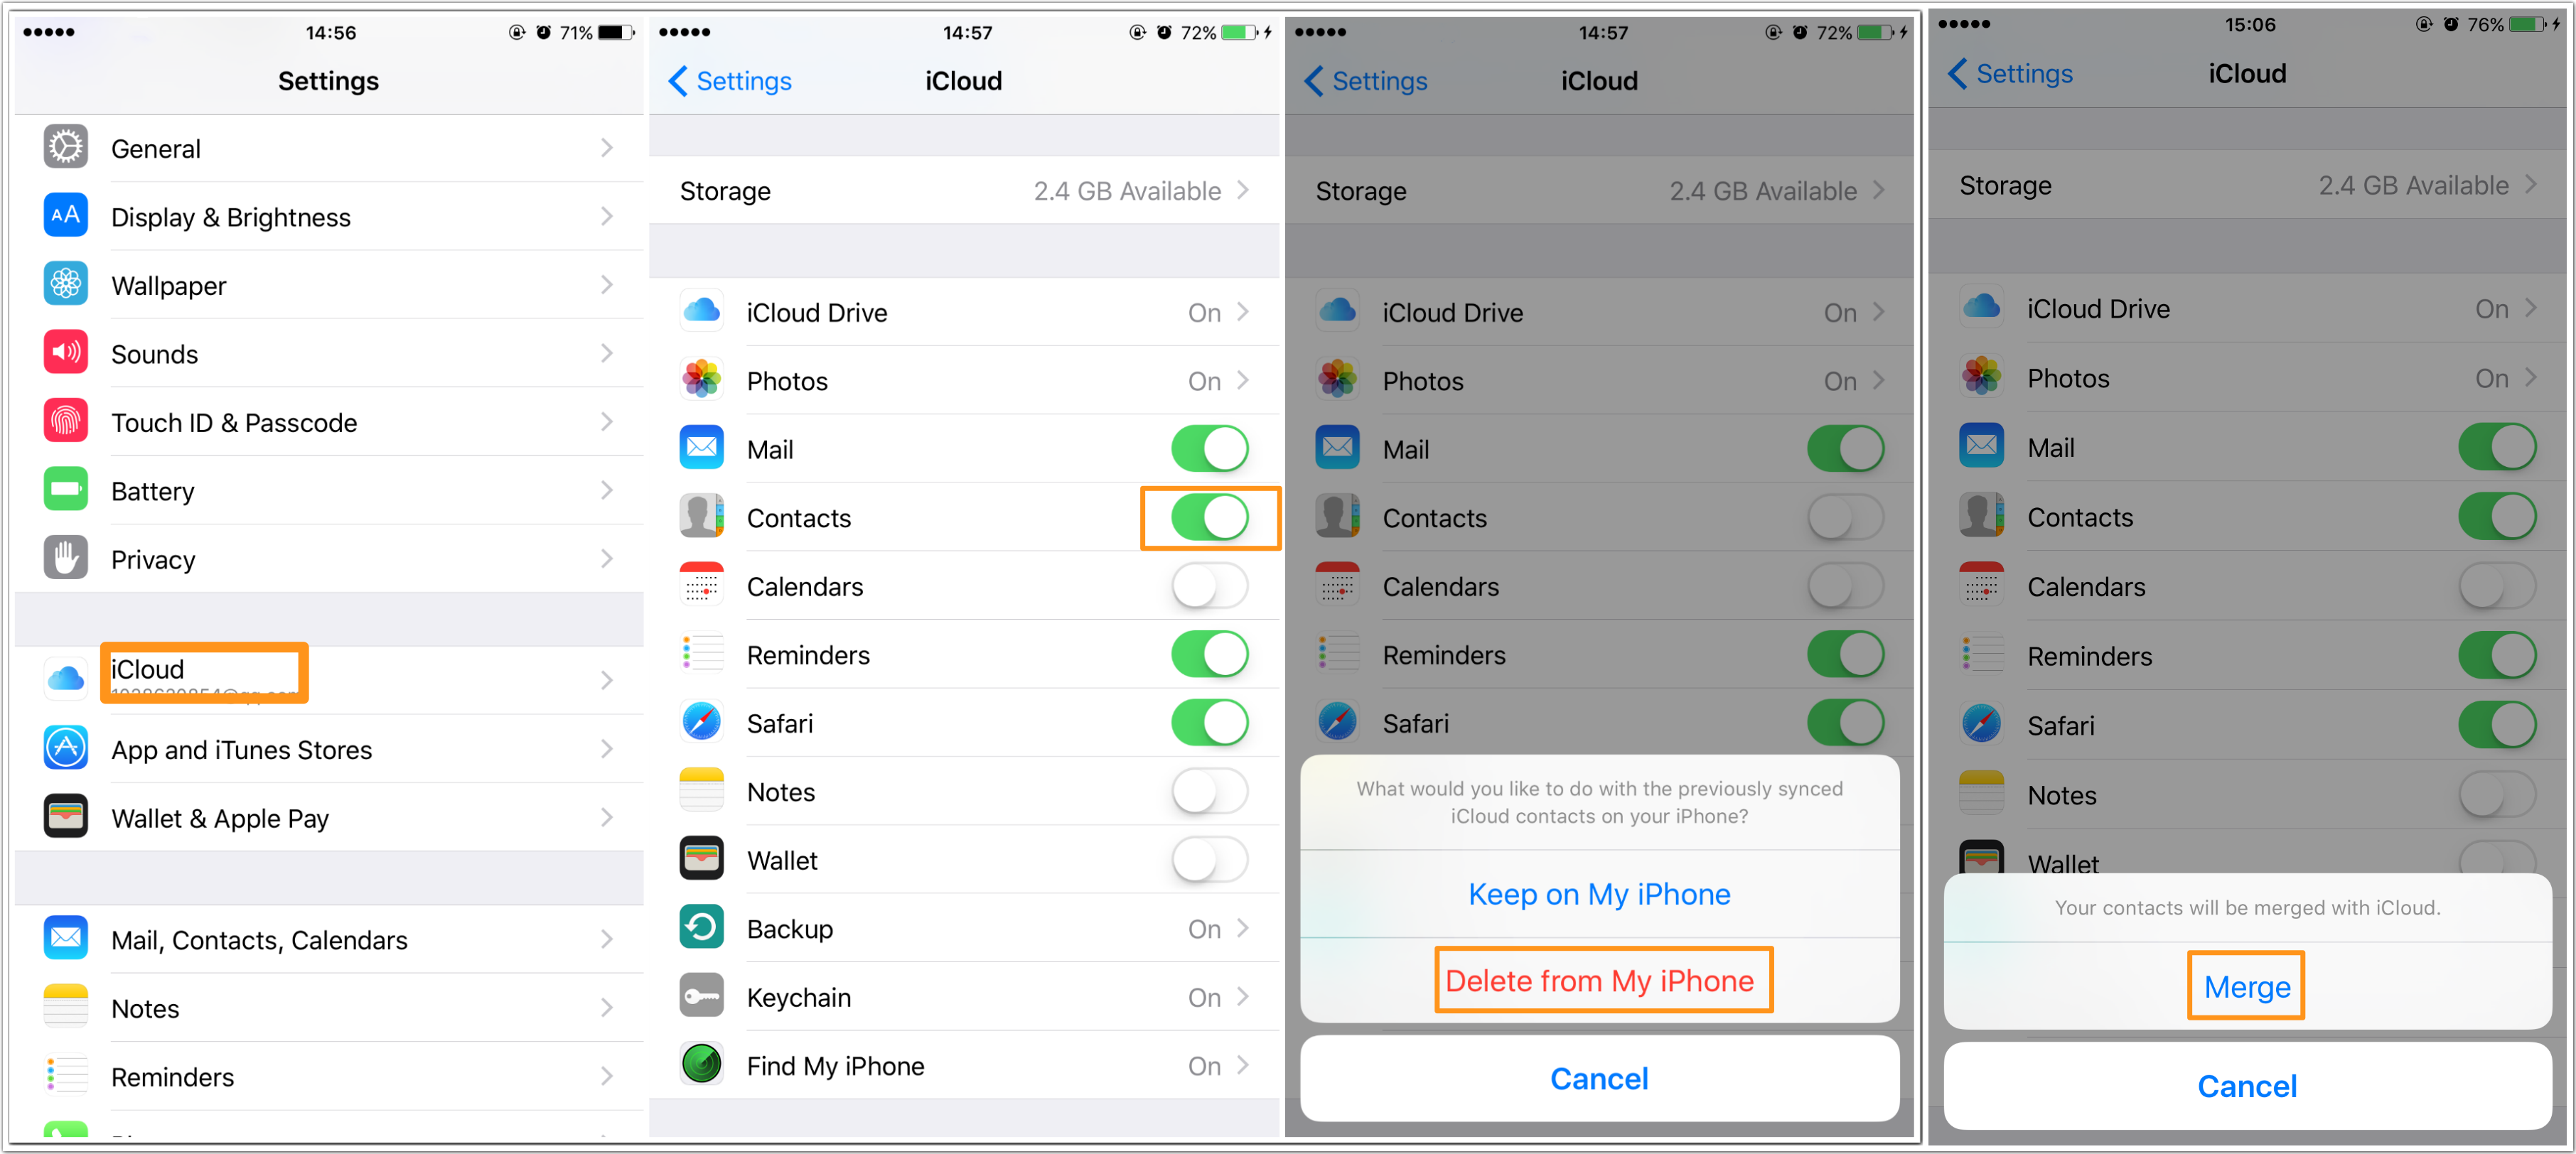 How to Find Deleted Contacts on iPhone 6/6s/7 via Merging